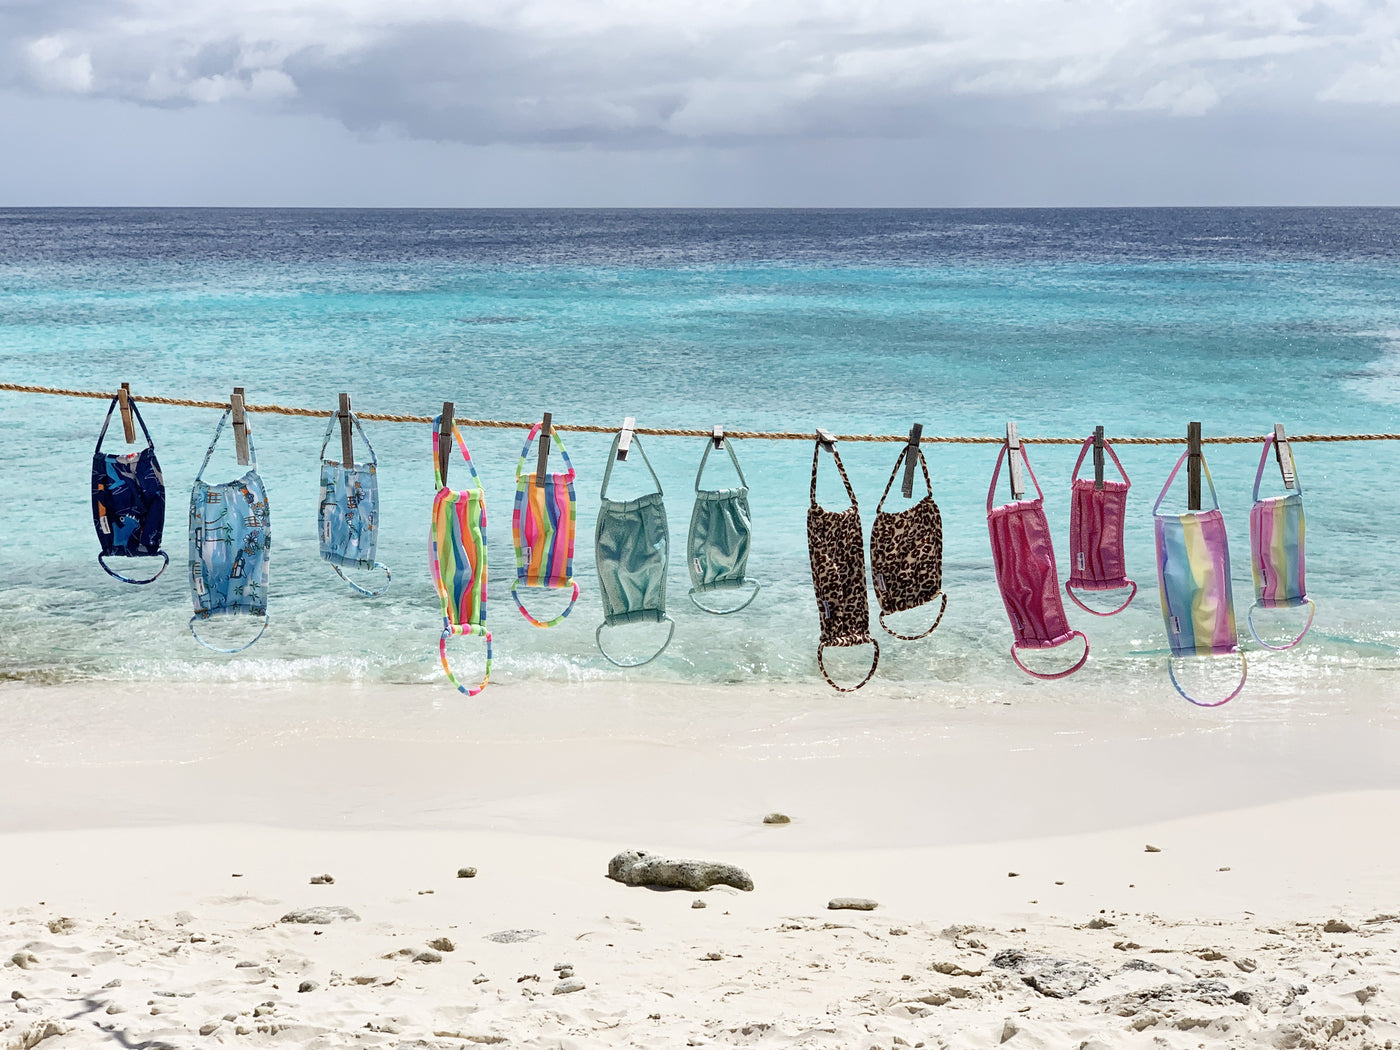 Clothing line at the beach with hanging face masks of various colors from the Flap Happy face masks collection.